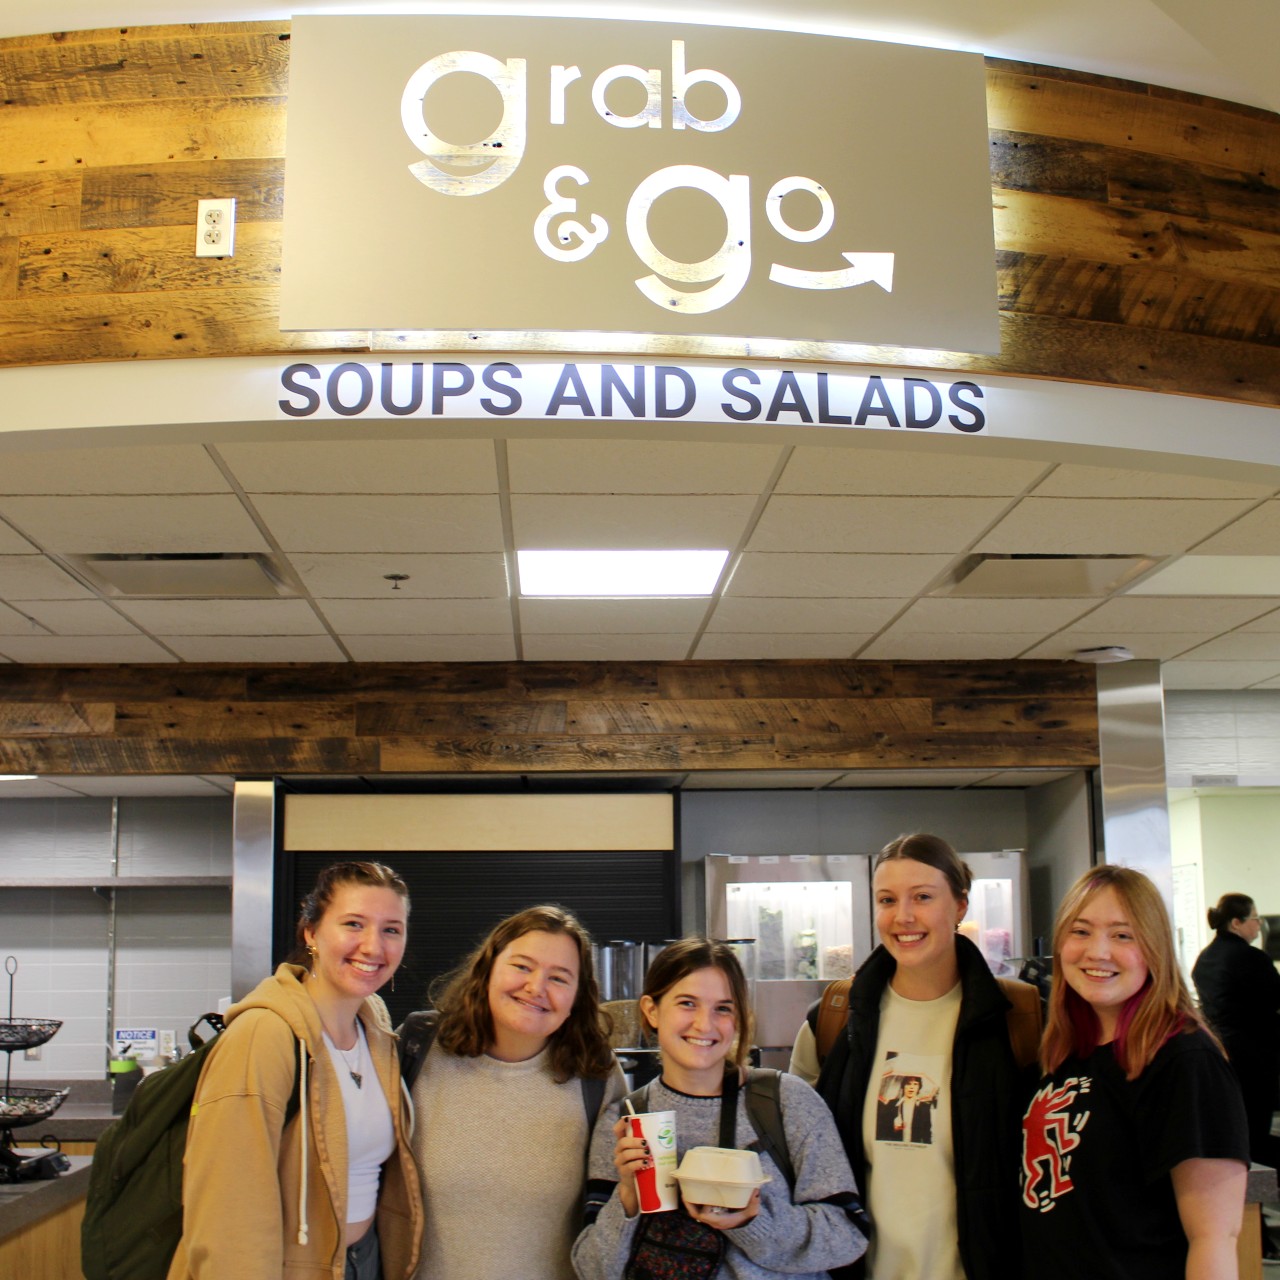 A group of friends smiling in the food court near Grab & Go: Soups and Salads